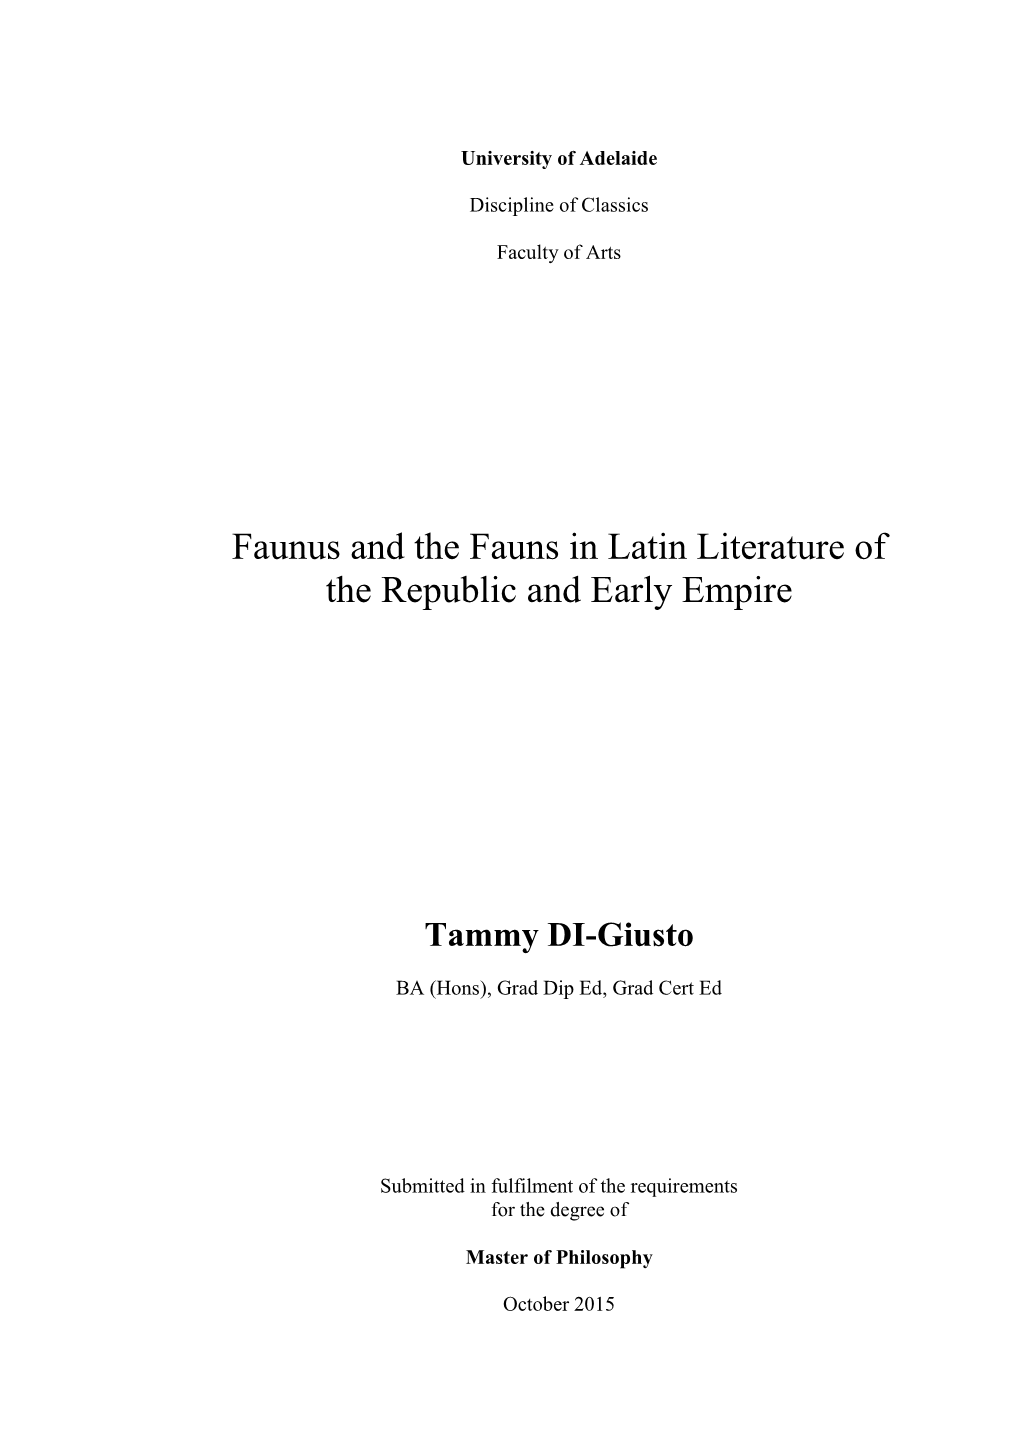 Faunus and the Fauns in Latin Literature of the Republic and Early Empire